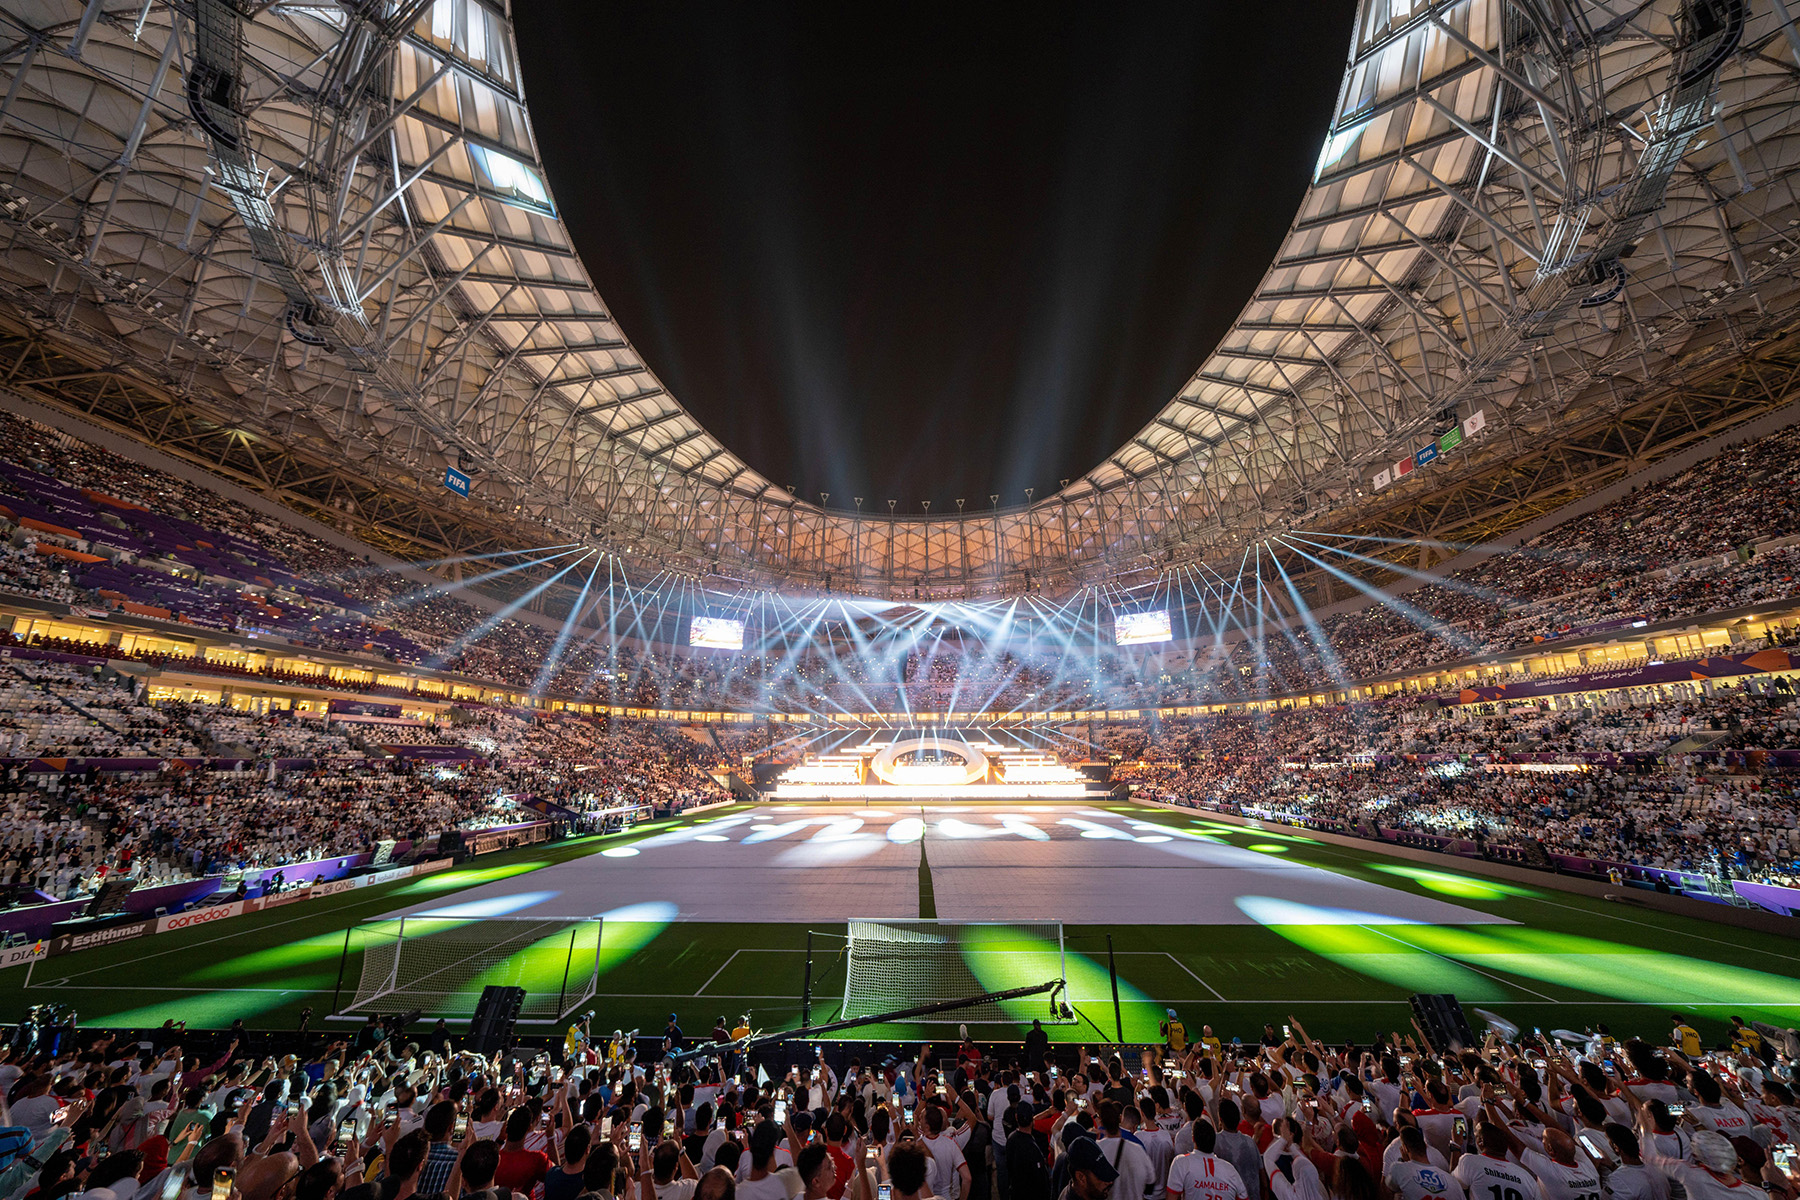 The photograph shows a soccer stadium filled with people and spotlights. 